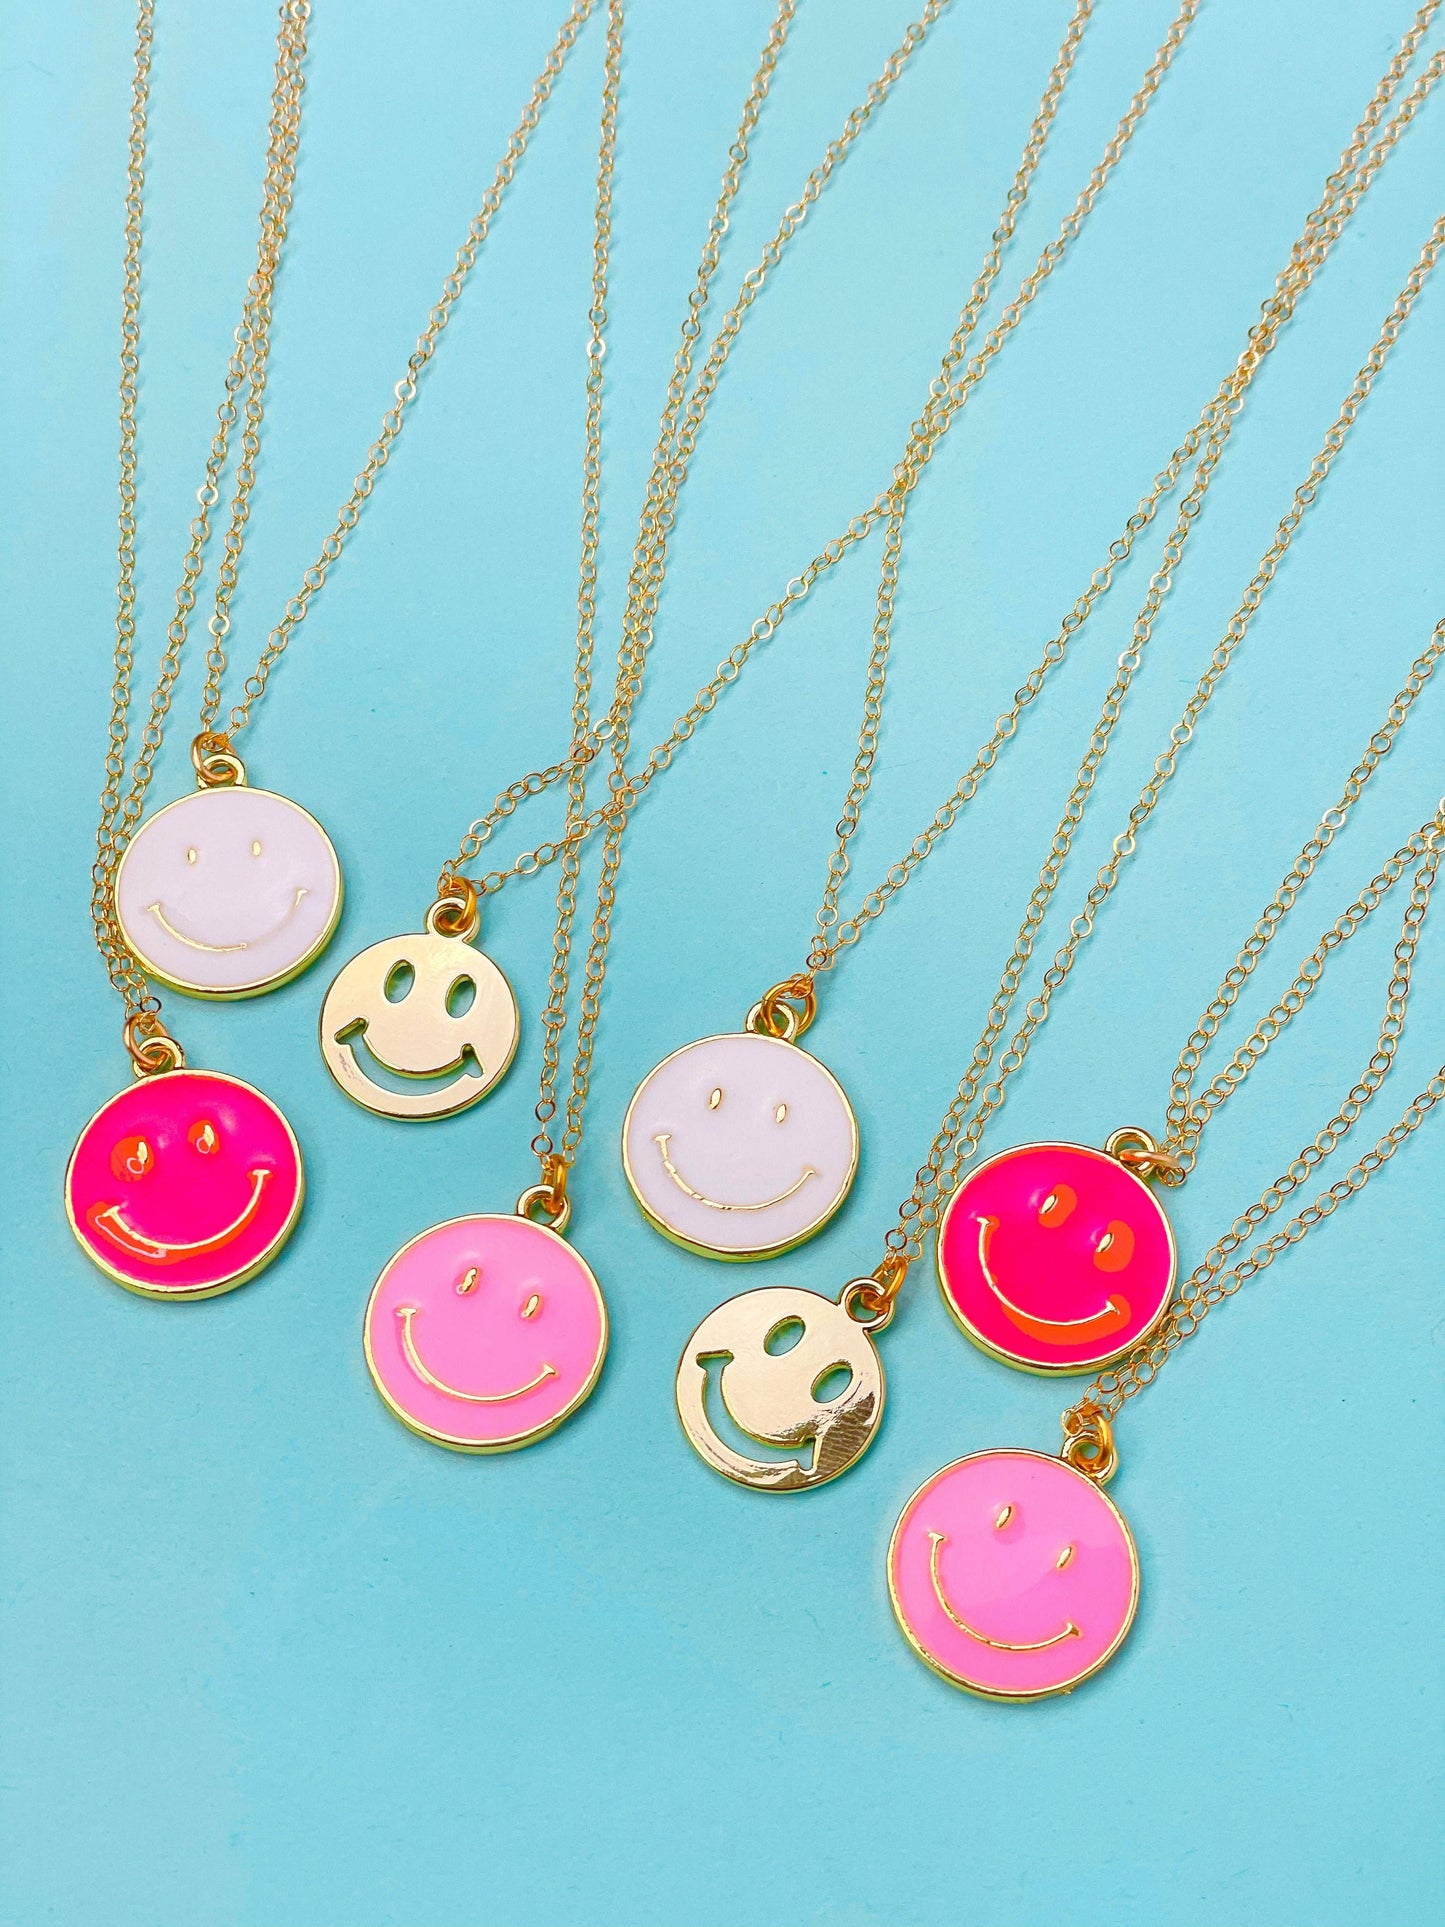 Taylor Shaye Designs Dainty Chain Smiley Necklace: Gold